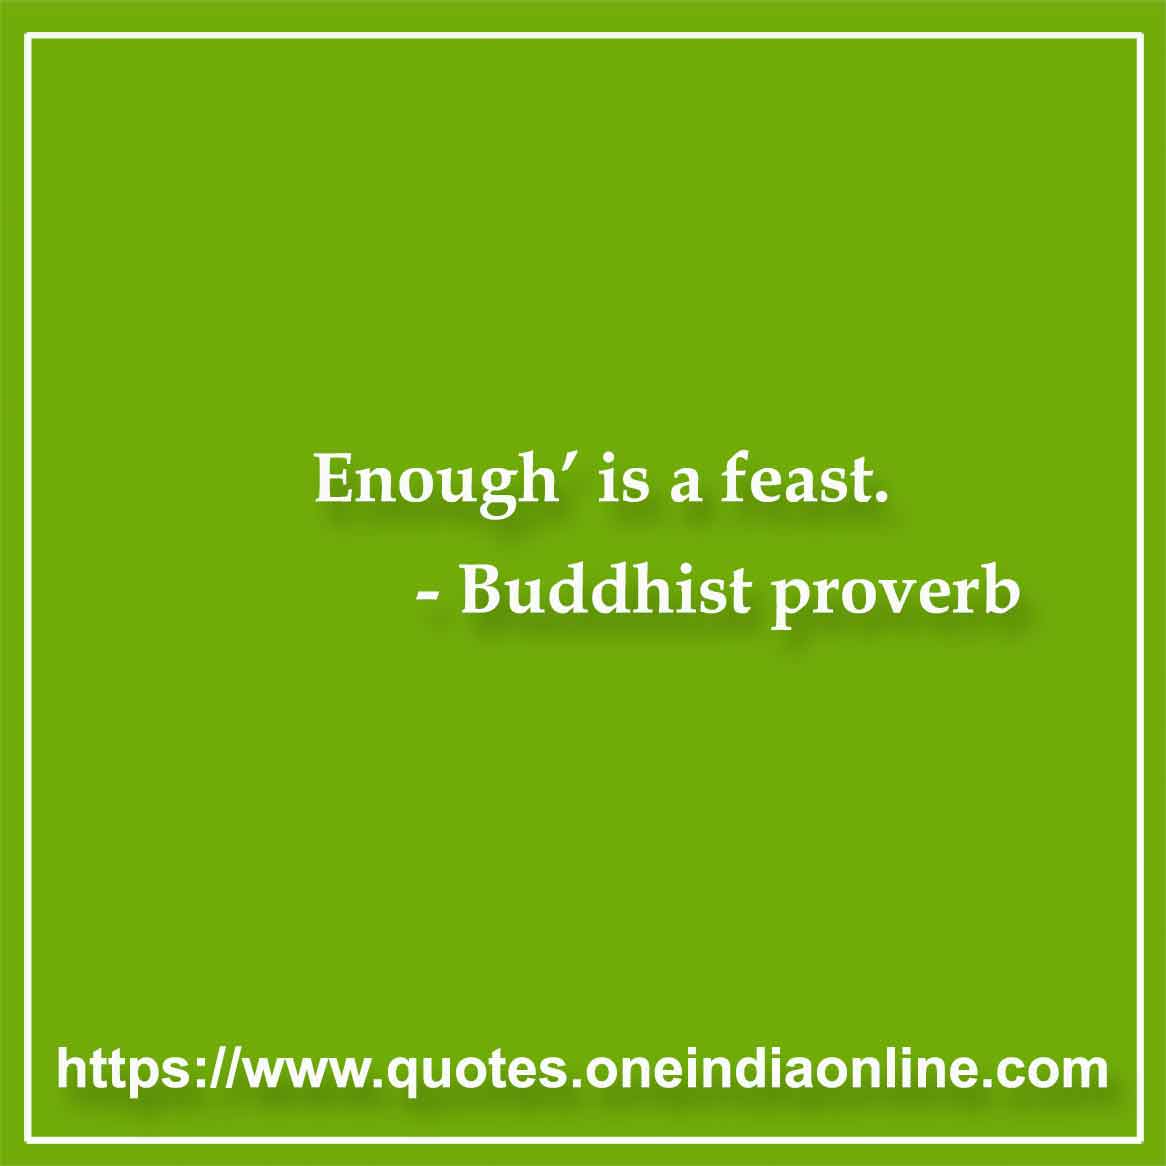 Enough’ is a feast.

- Buddhist proverb